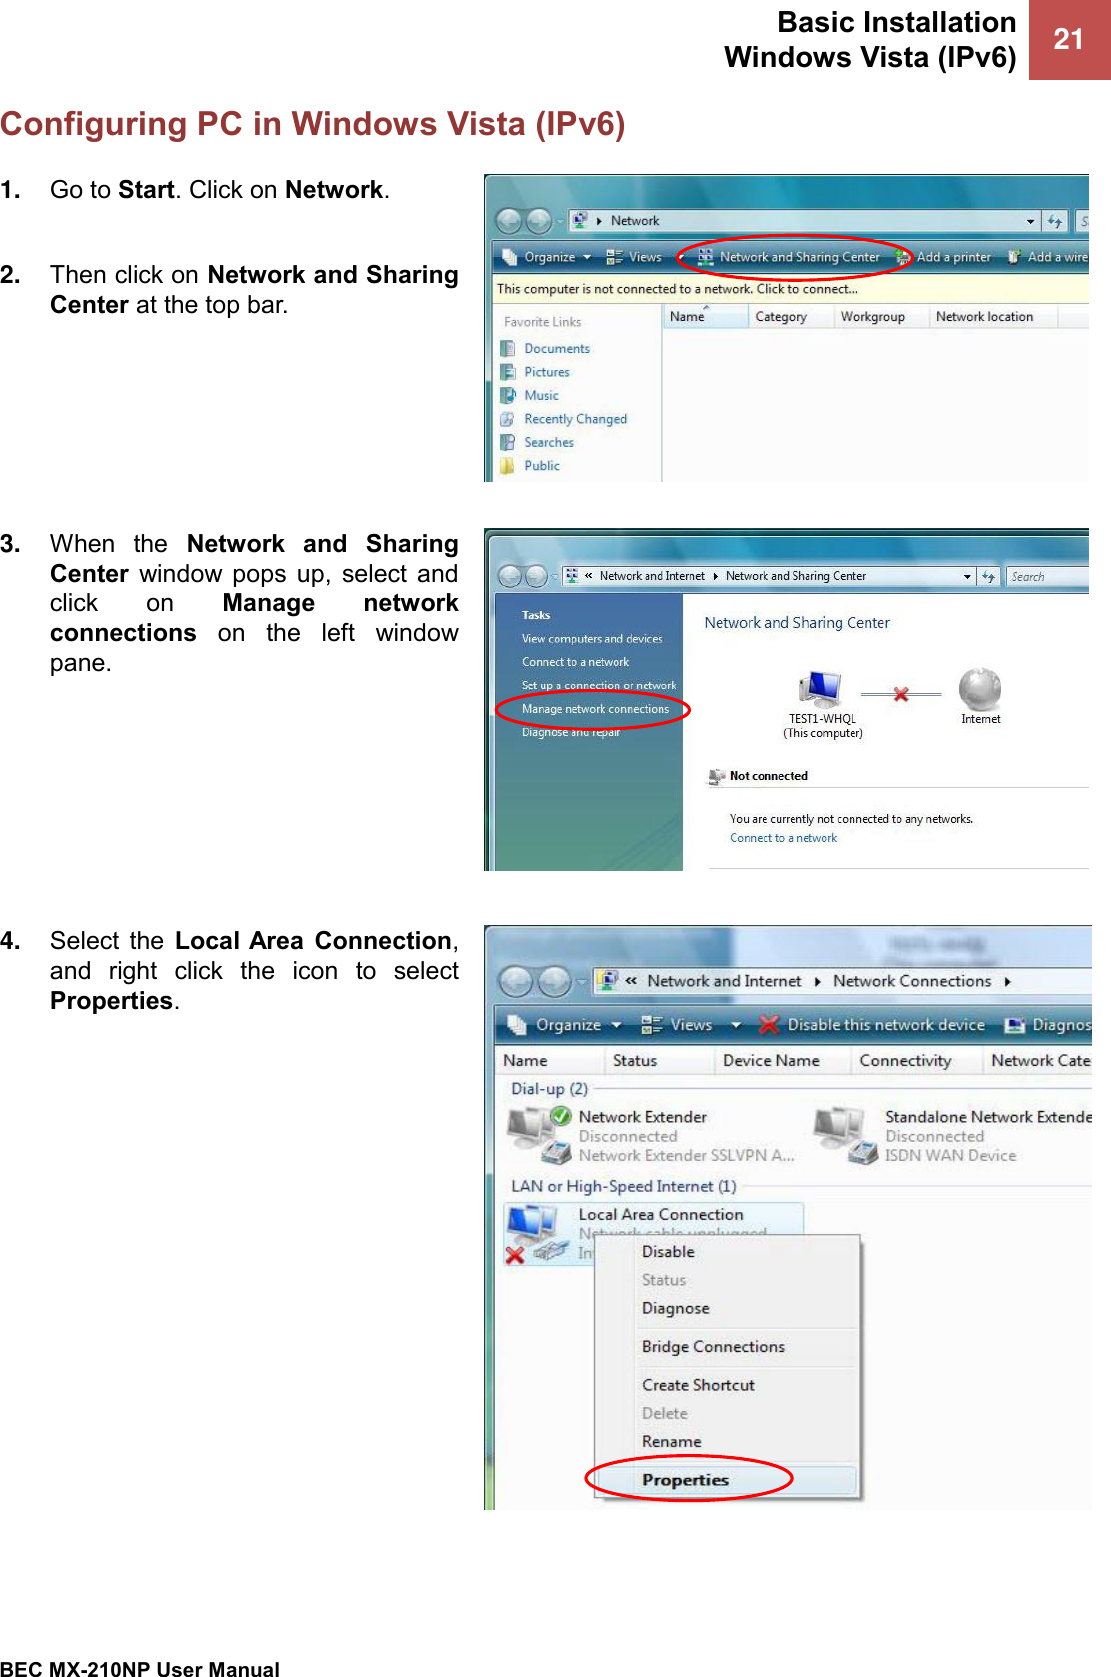 Basic Installation Windows Vista (IPv6) 21   BEC MX-210NP User Manual  Configuring PC in Windows Vista (IPv6) 1. Go to Start. Click on Network.  2. Then click on Network and Sharing Center at the top bar.  3. When  the  Network  and  Sharing Center  window  pops  up,  select  and click  on  Manage  network connections  on  the  left  window pane.  4. Select  the  Local Area  Connection, and  right  click  the  icon  to  select Properties.  